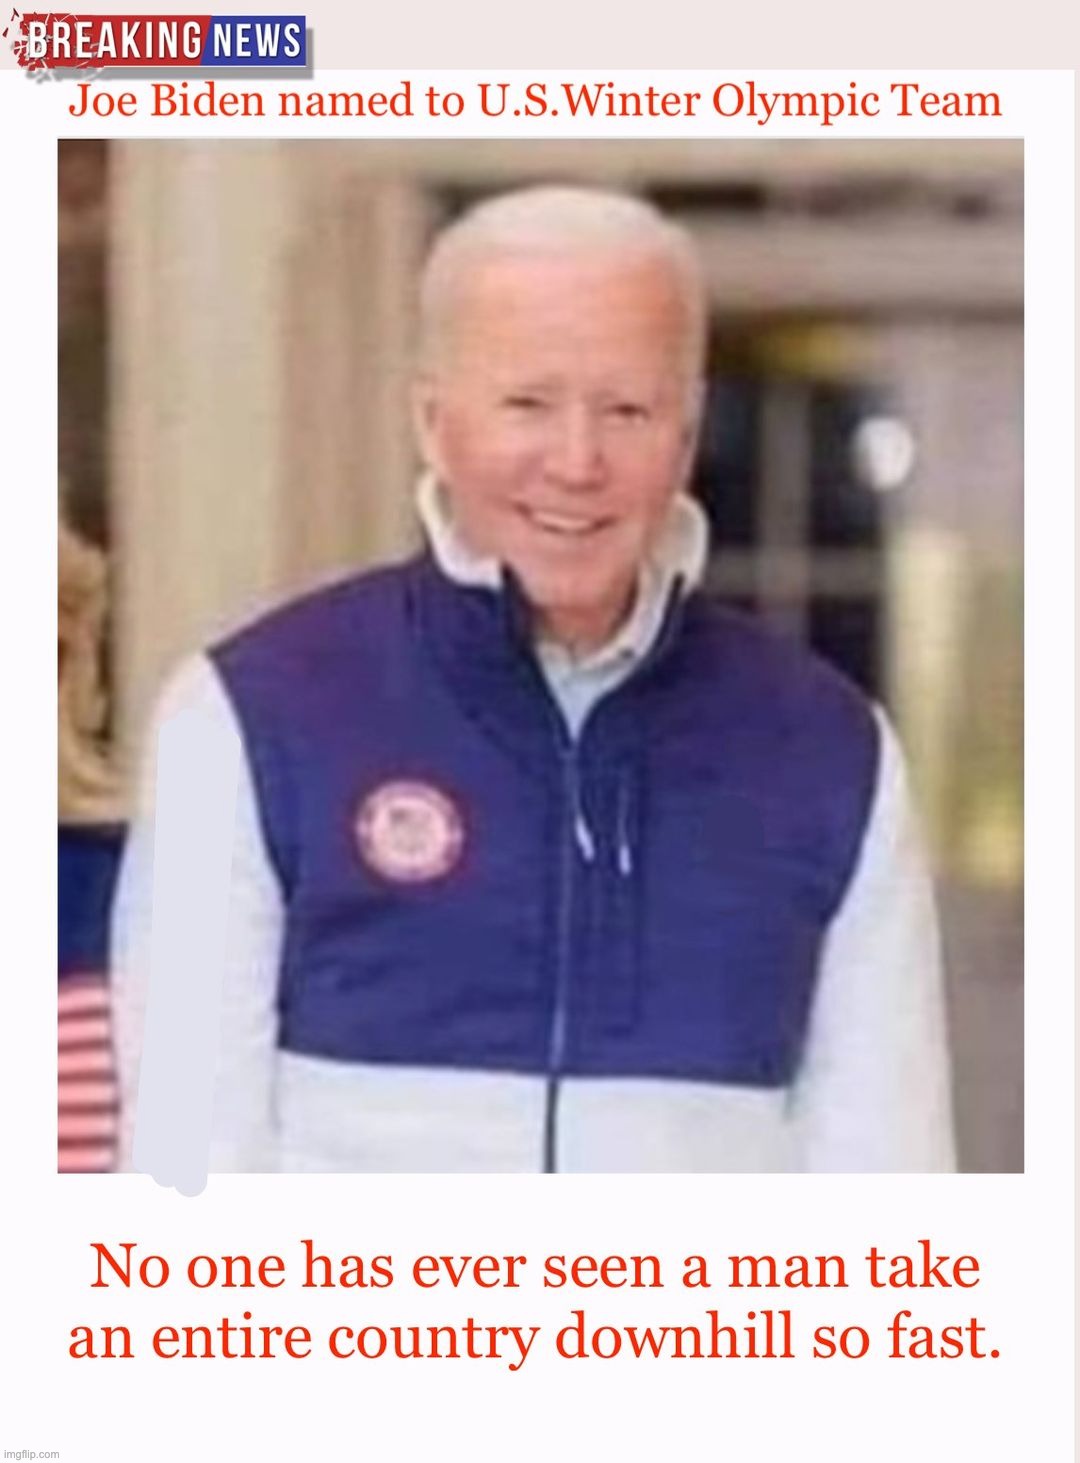 Italy 2026 | image tagged in winter olympics,biden,fail | made w/ Imgflip meme maker